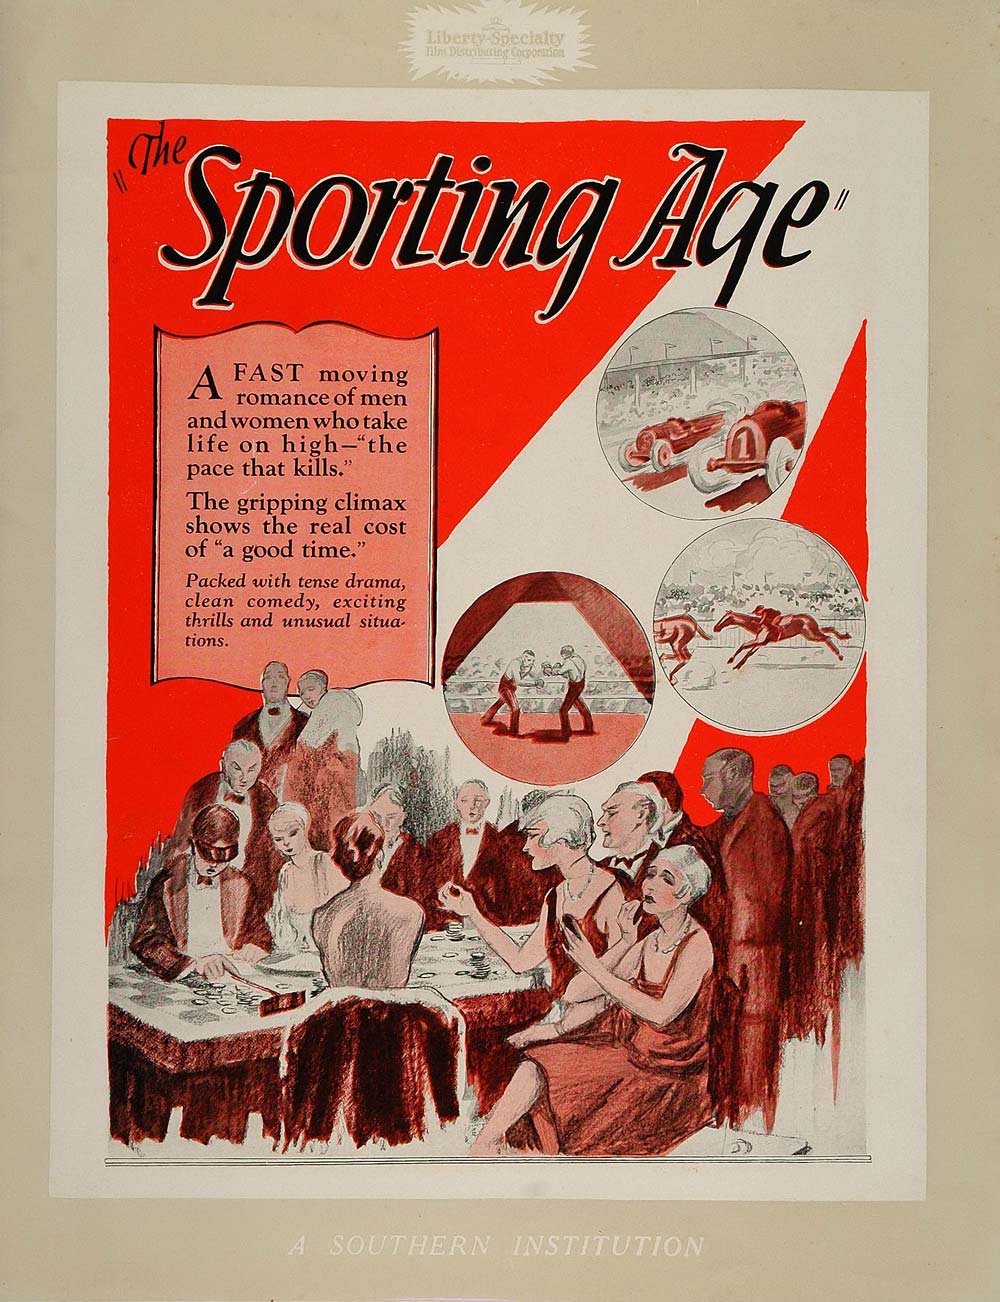 The Sporting Age